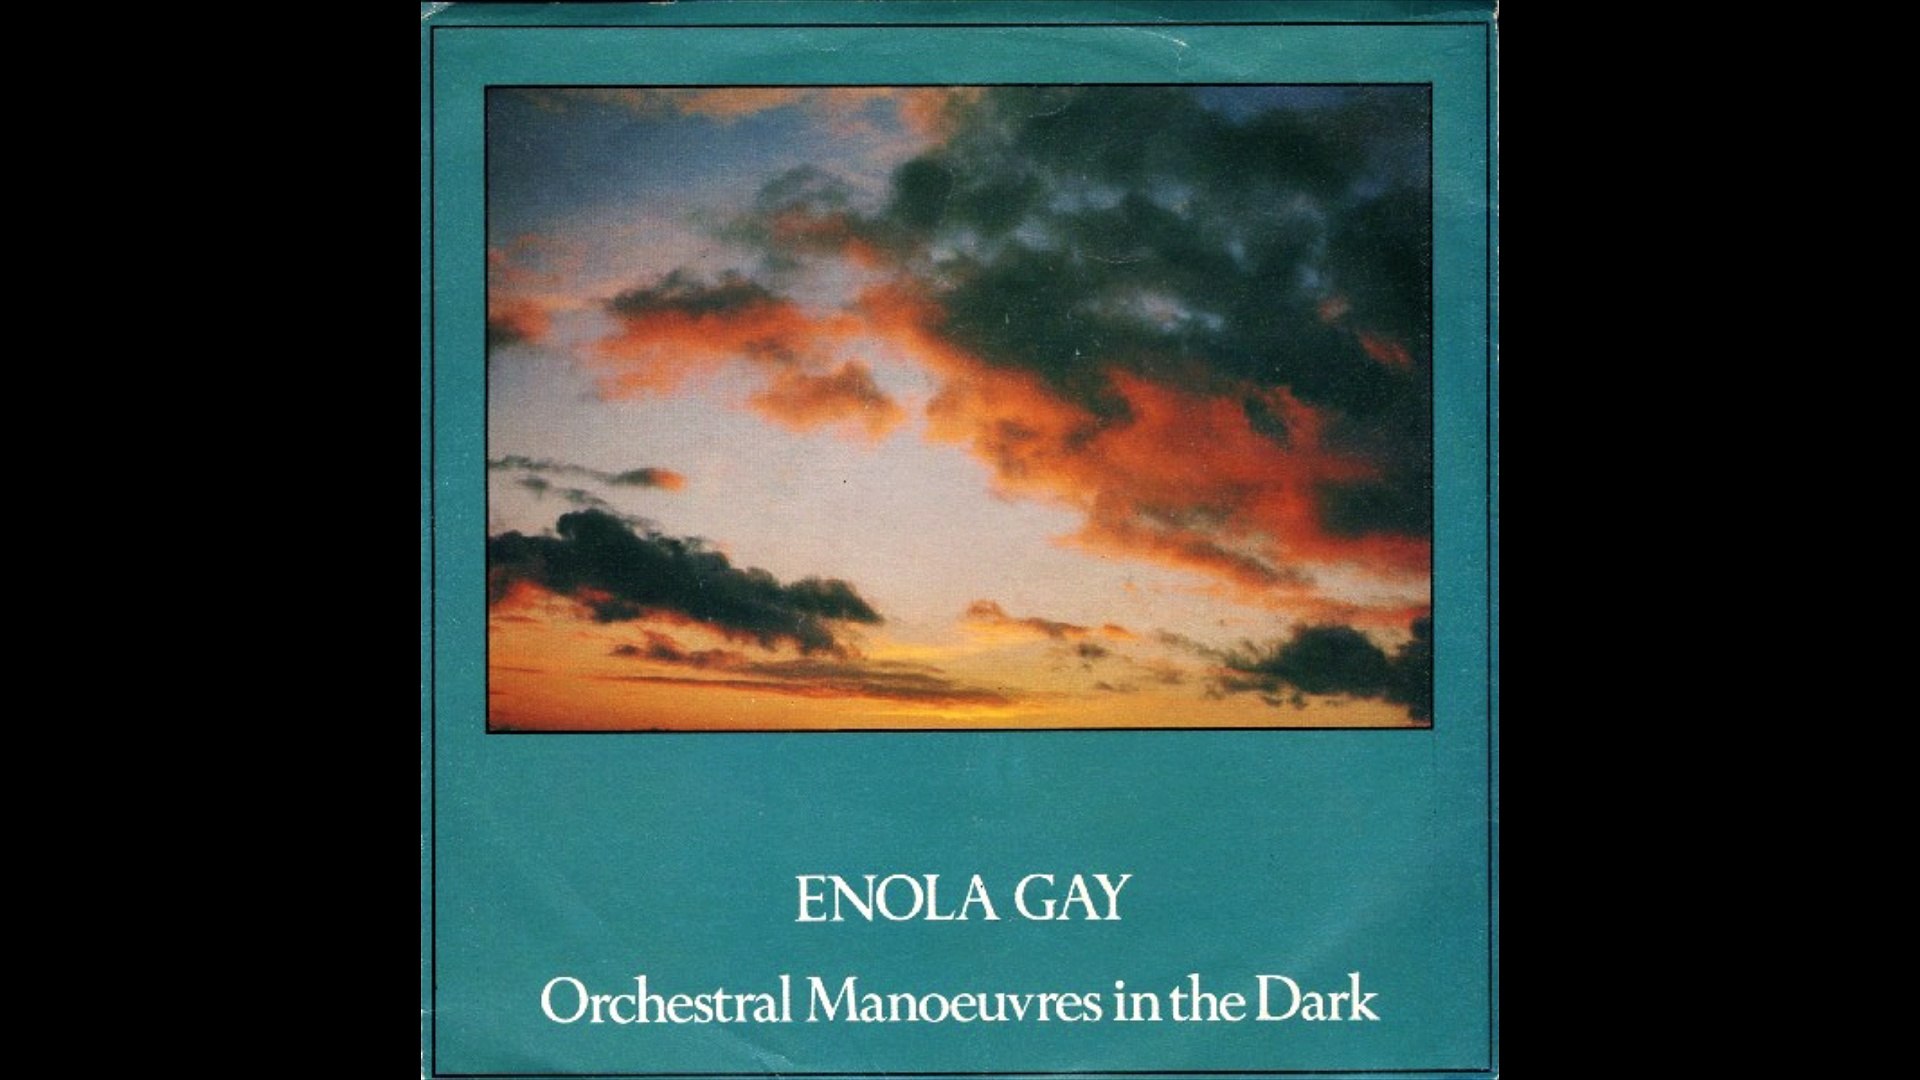 Orchestral Manoeuvres in the Dark - Enola Gay [1980] - 45 rpm